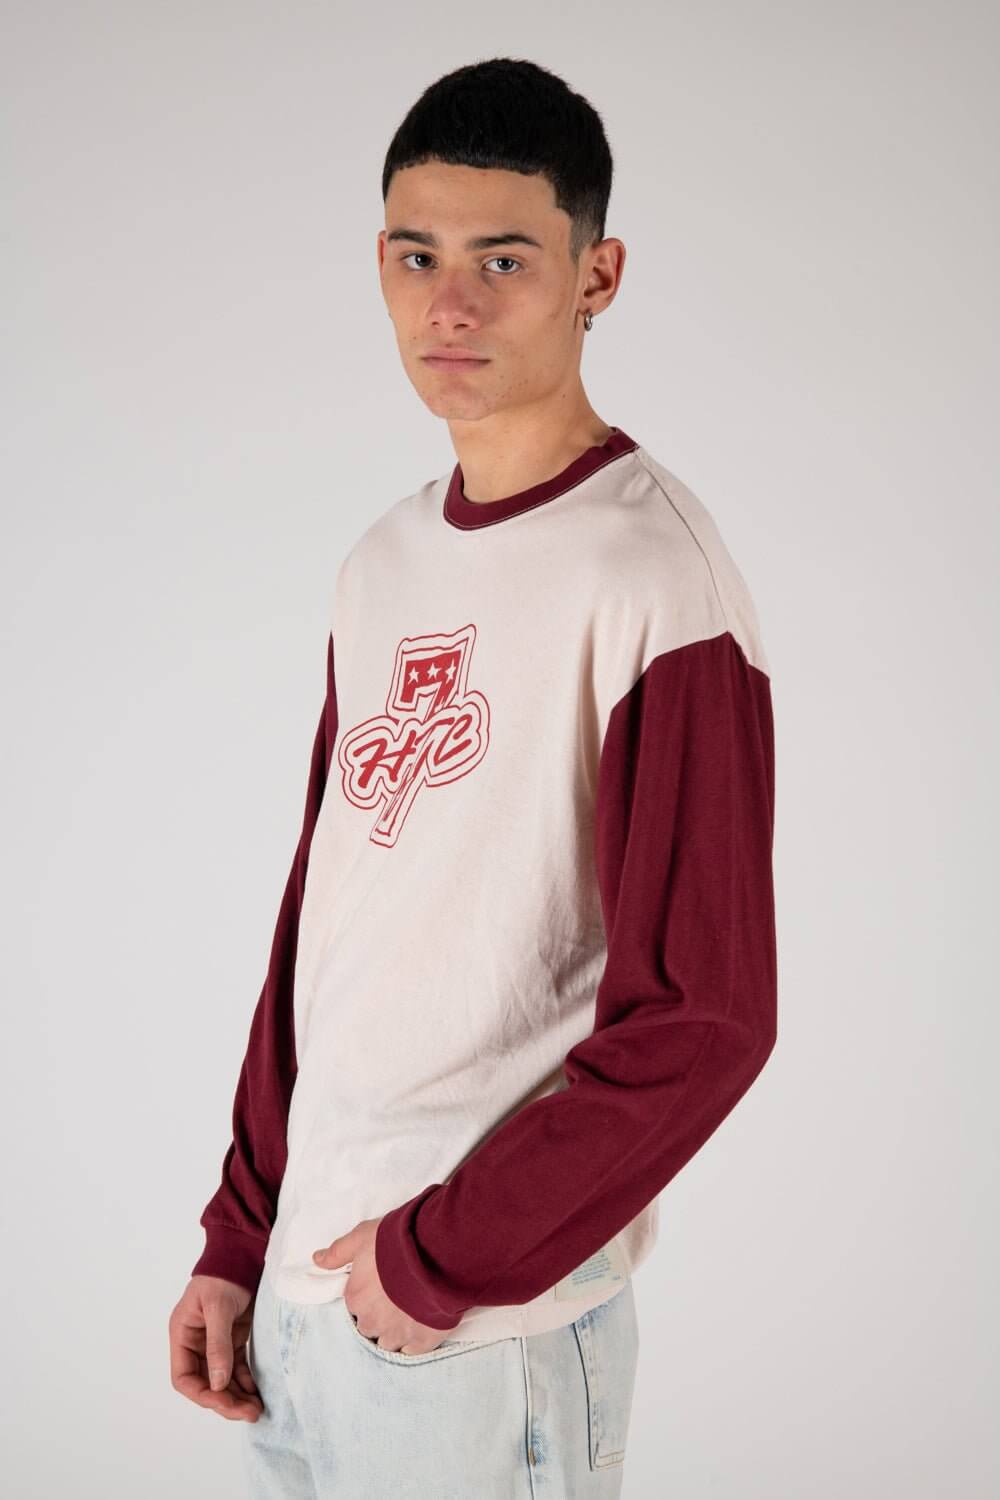 LUCKY KID - AKA7 Regular fit long sleeve t-shirt printed on the front. Composition: 100% Cotton HTC LOS ANGELES